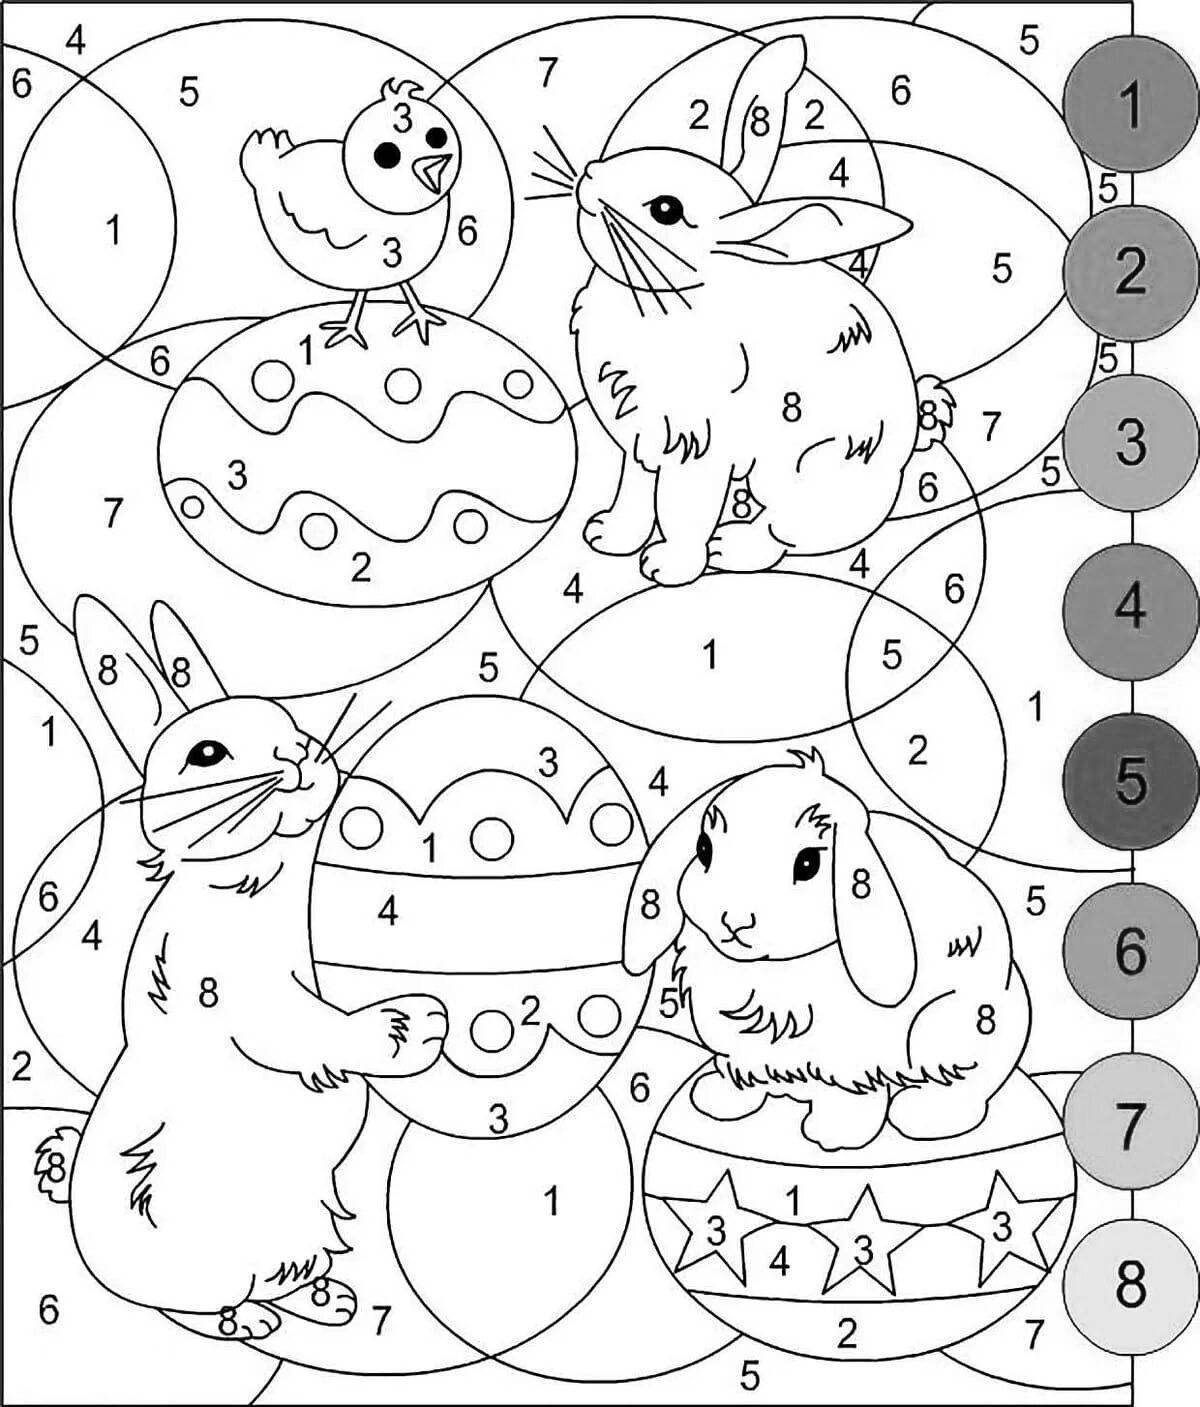 Explosion coloring for girls by numbers